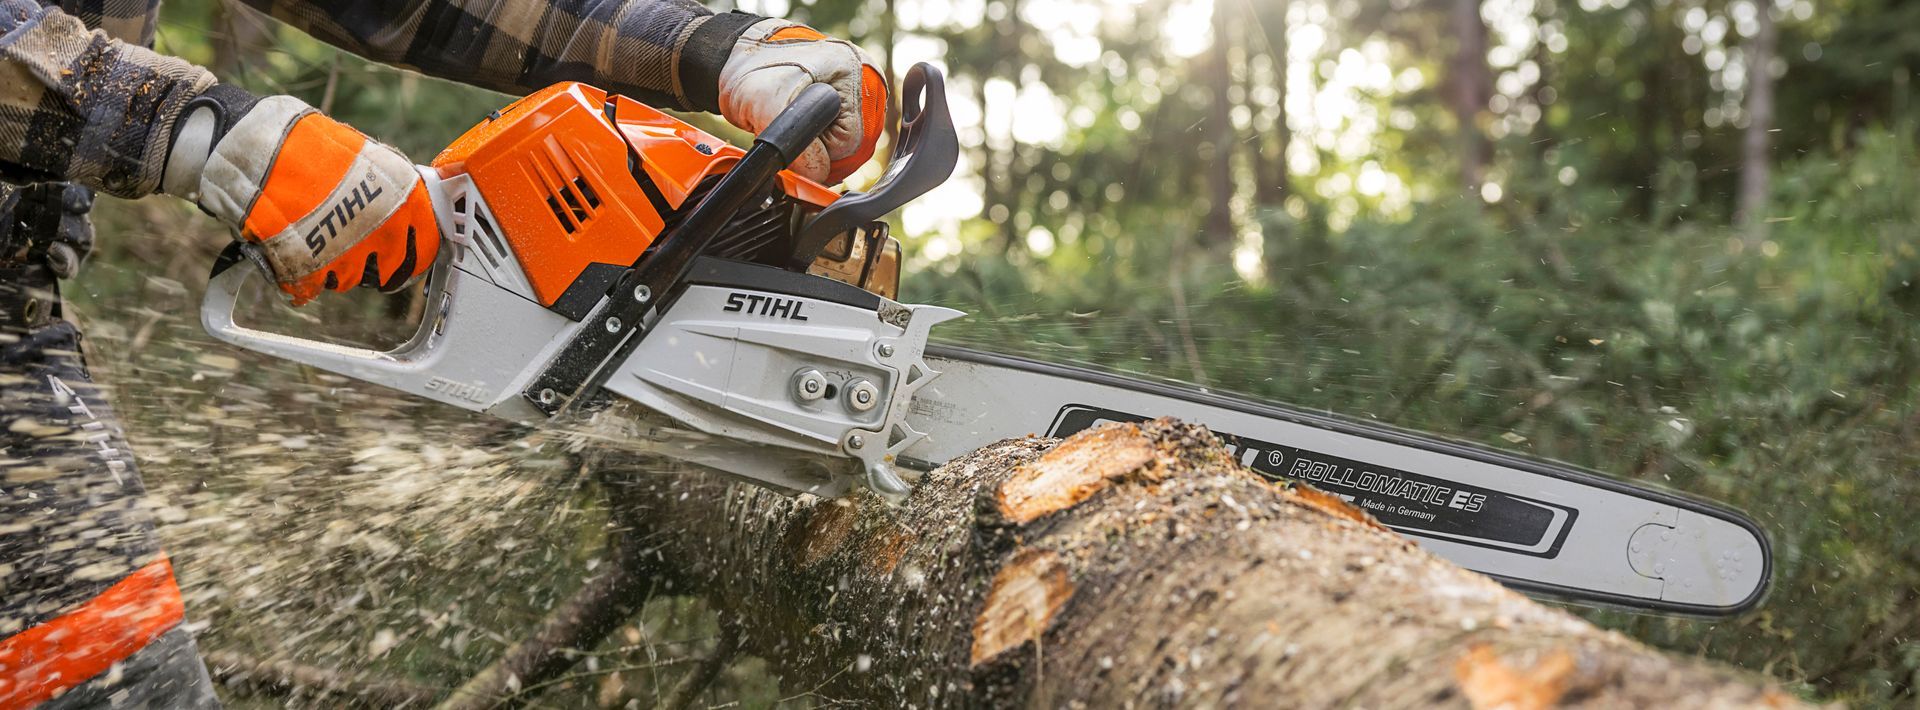 A man is using a chainsaw to cut a log in the woods.